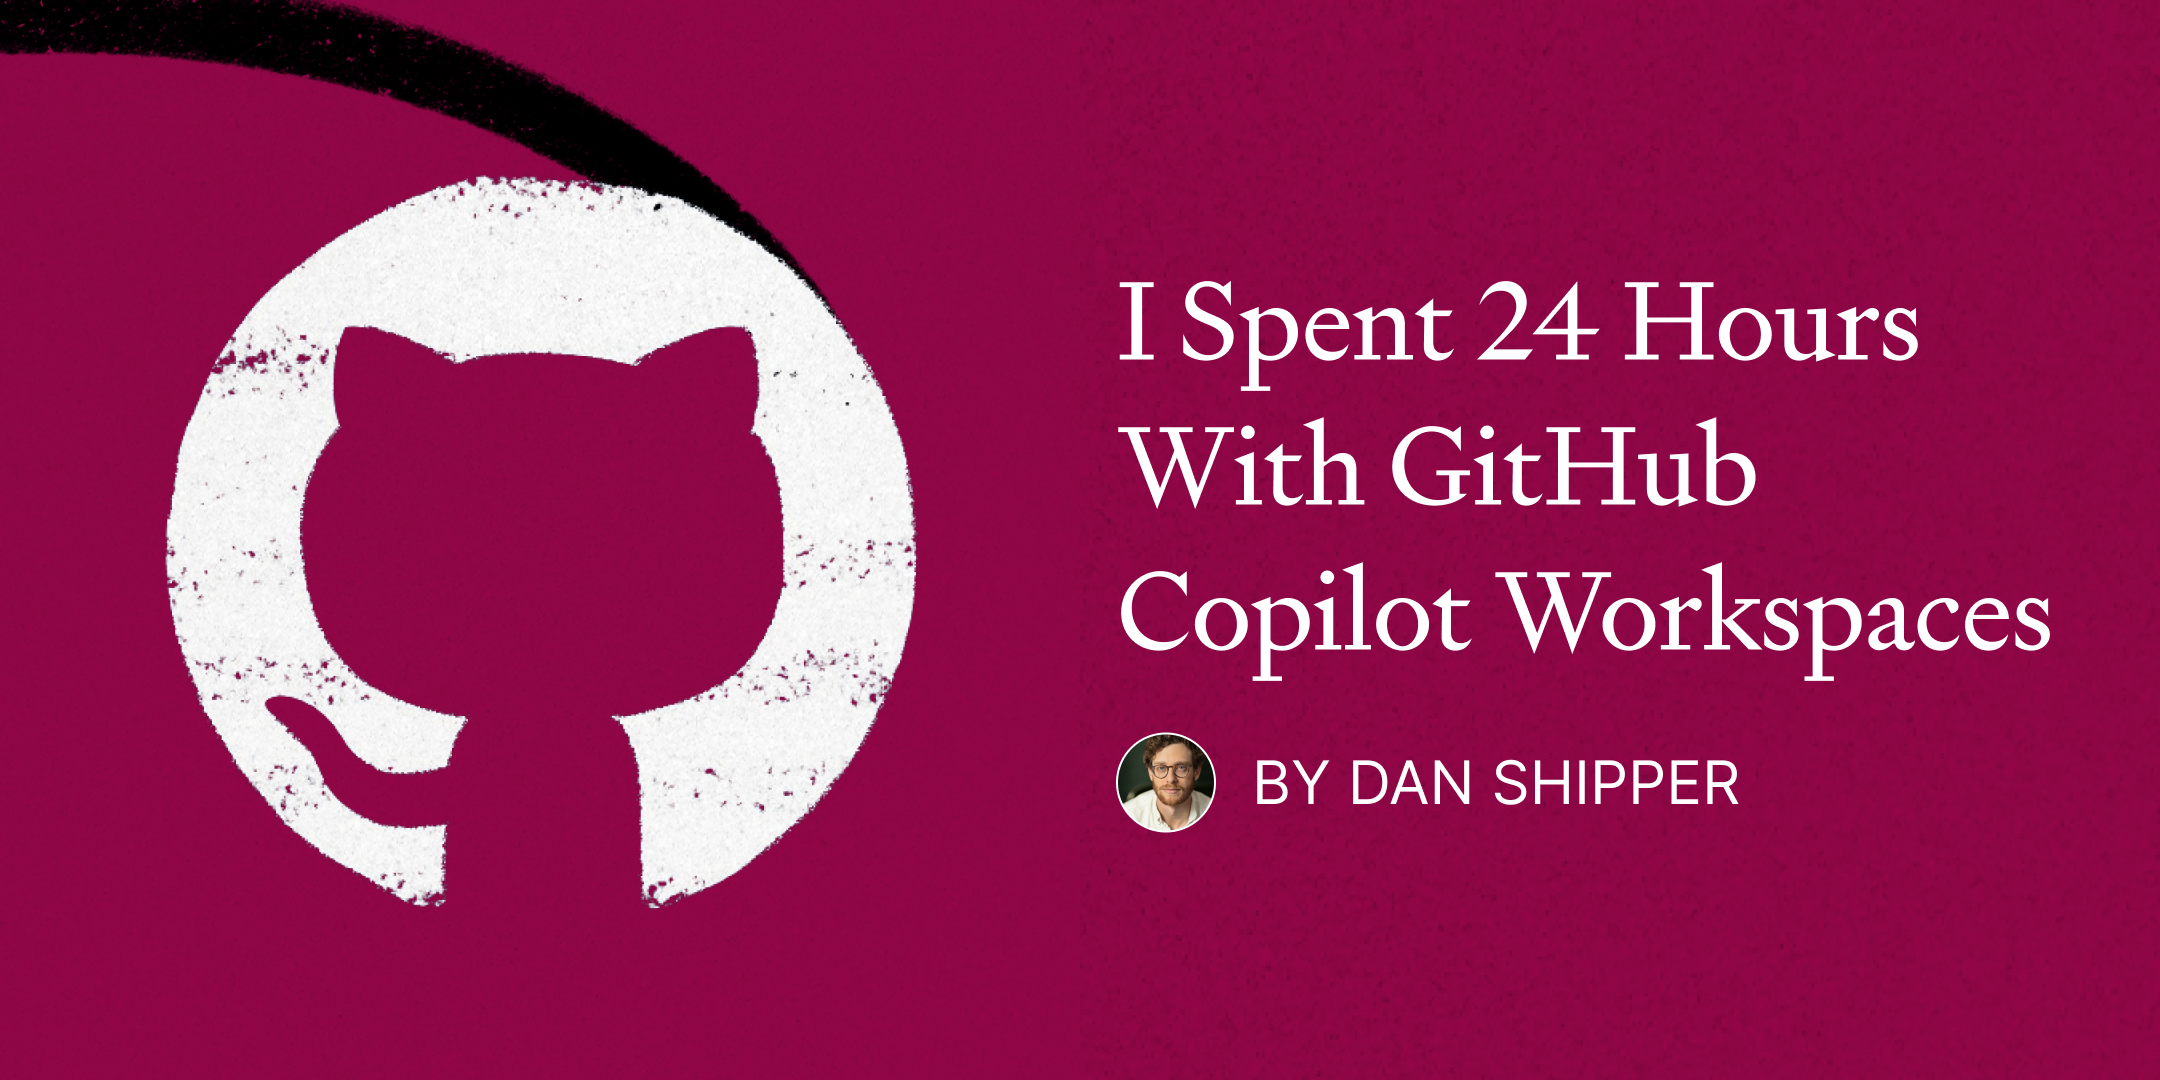 I Spent 24 Hours with GitHub Copilot Workspaces